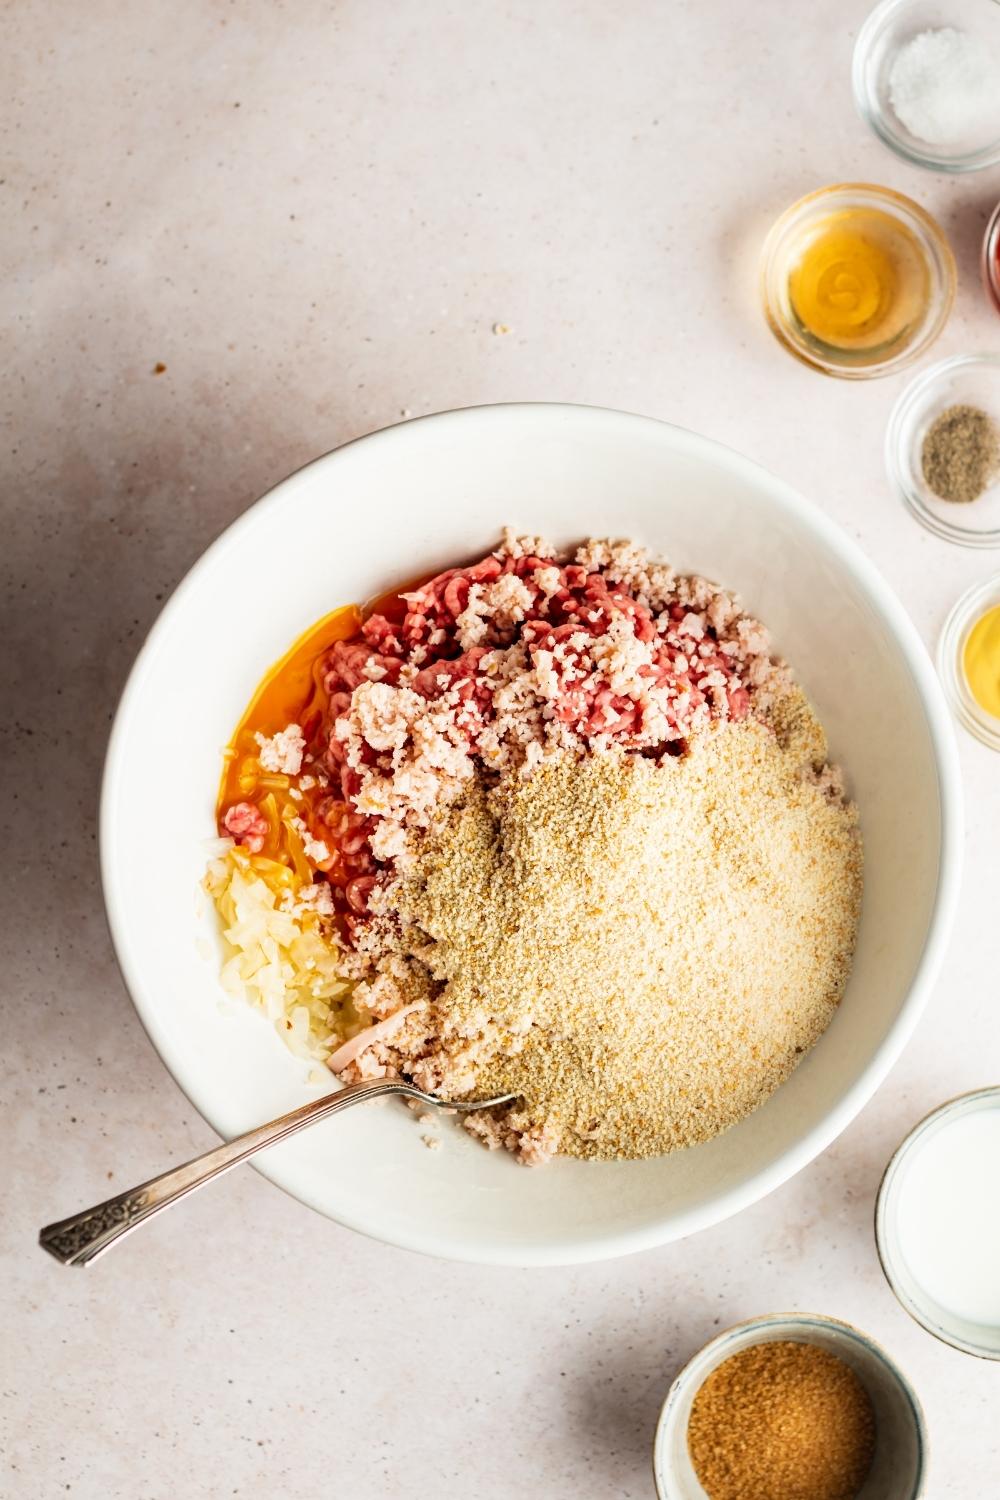 breadcrumbs, ground meat, and seasonings in a bowl